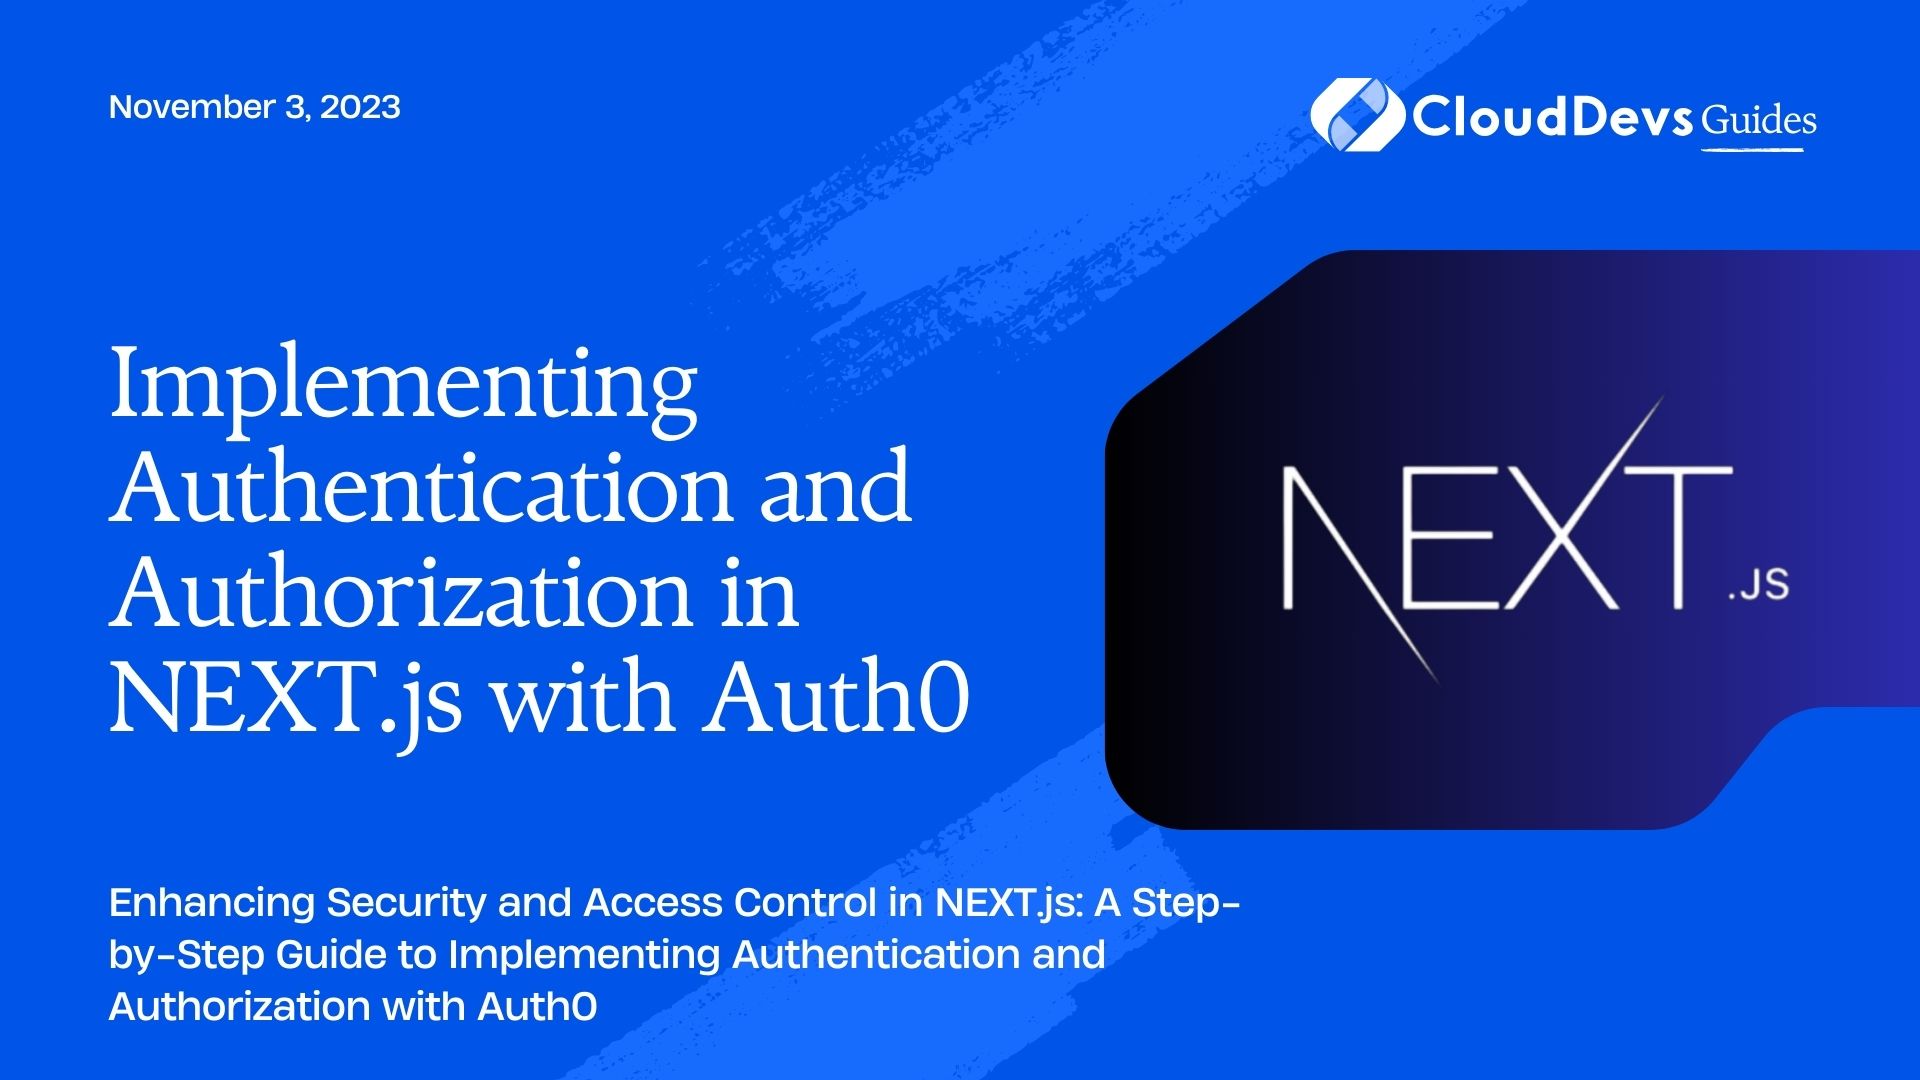 Implementing Authentication and Authorization in NEXT.js with Auth0